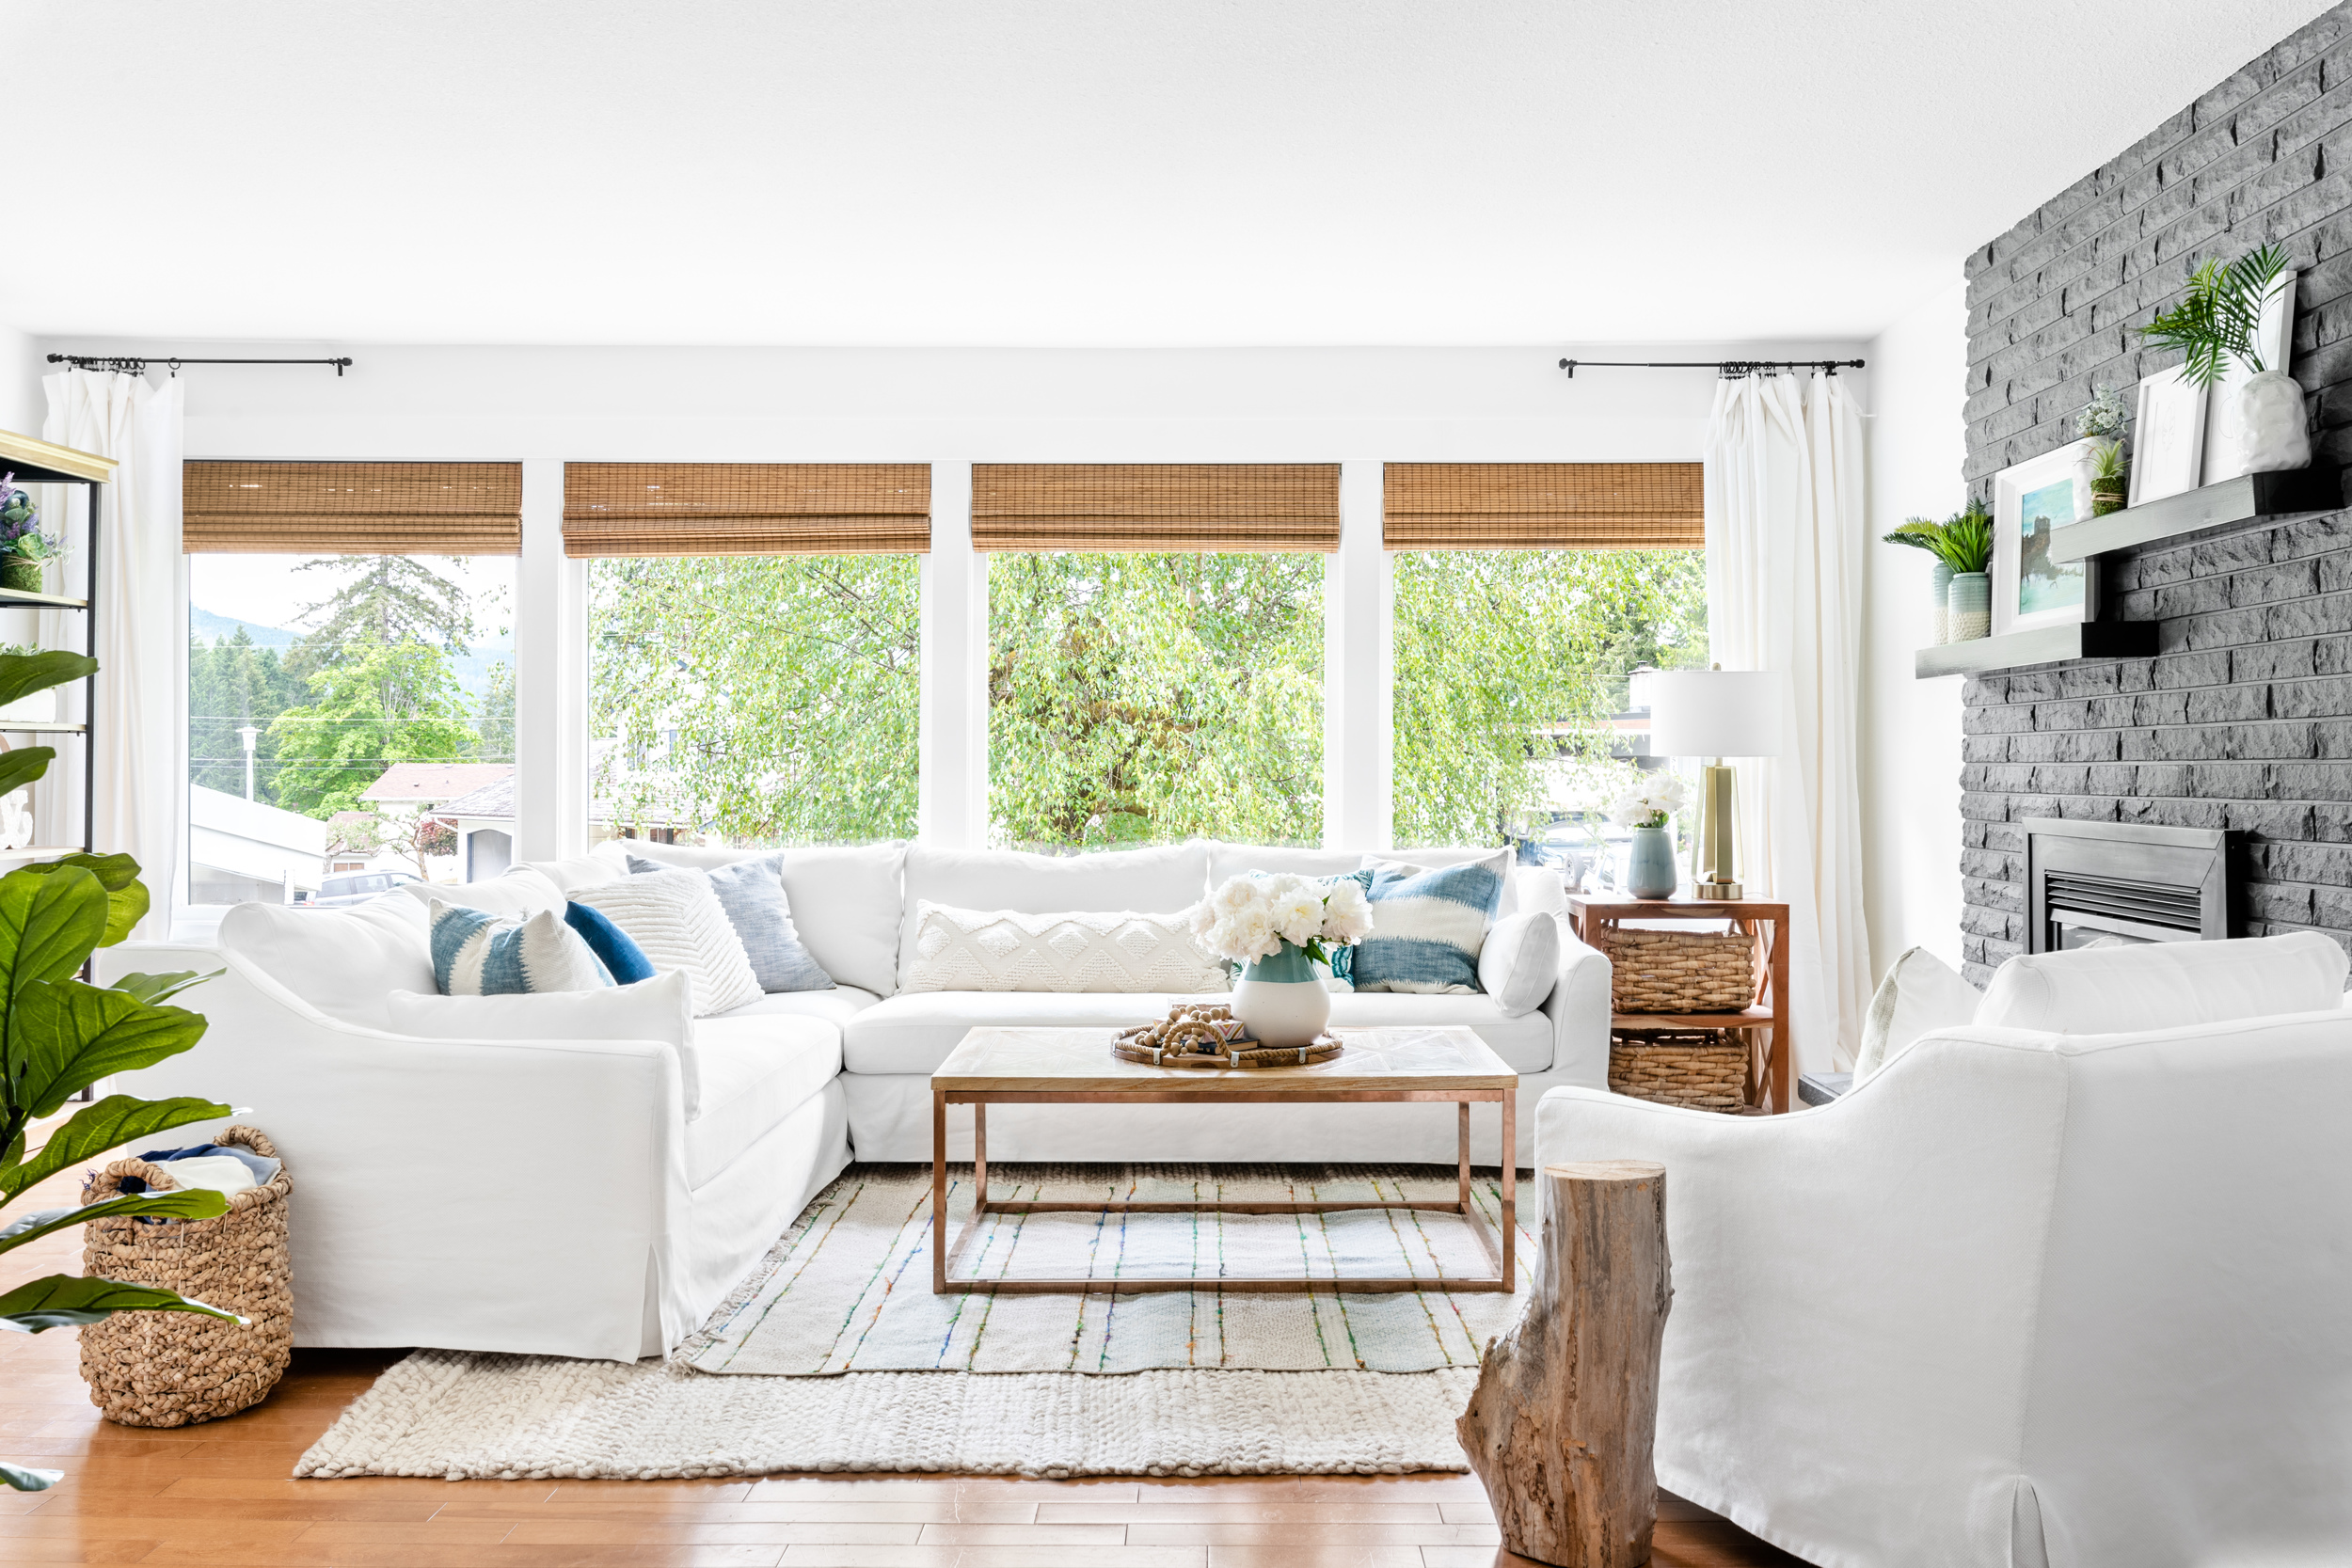 a light and bright living room with a white slipcovered sofa from the Ikea farlov line